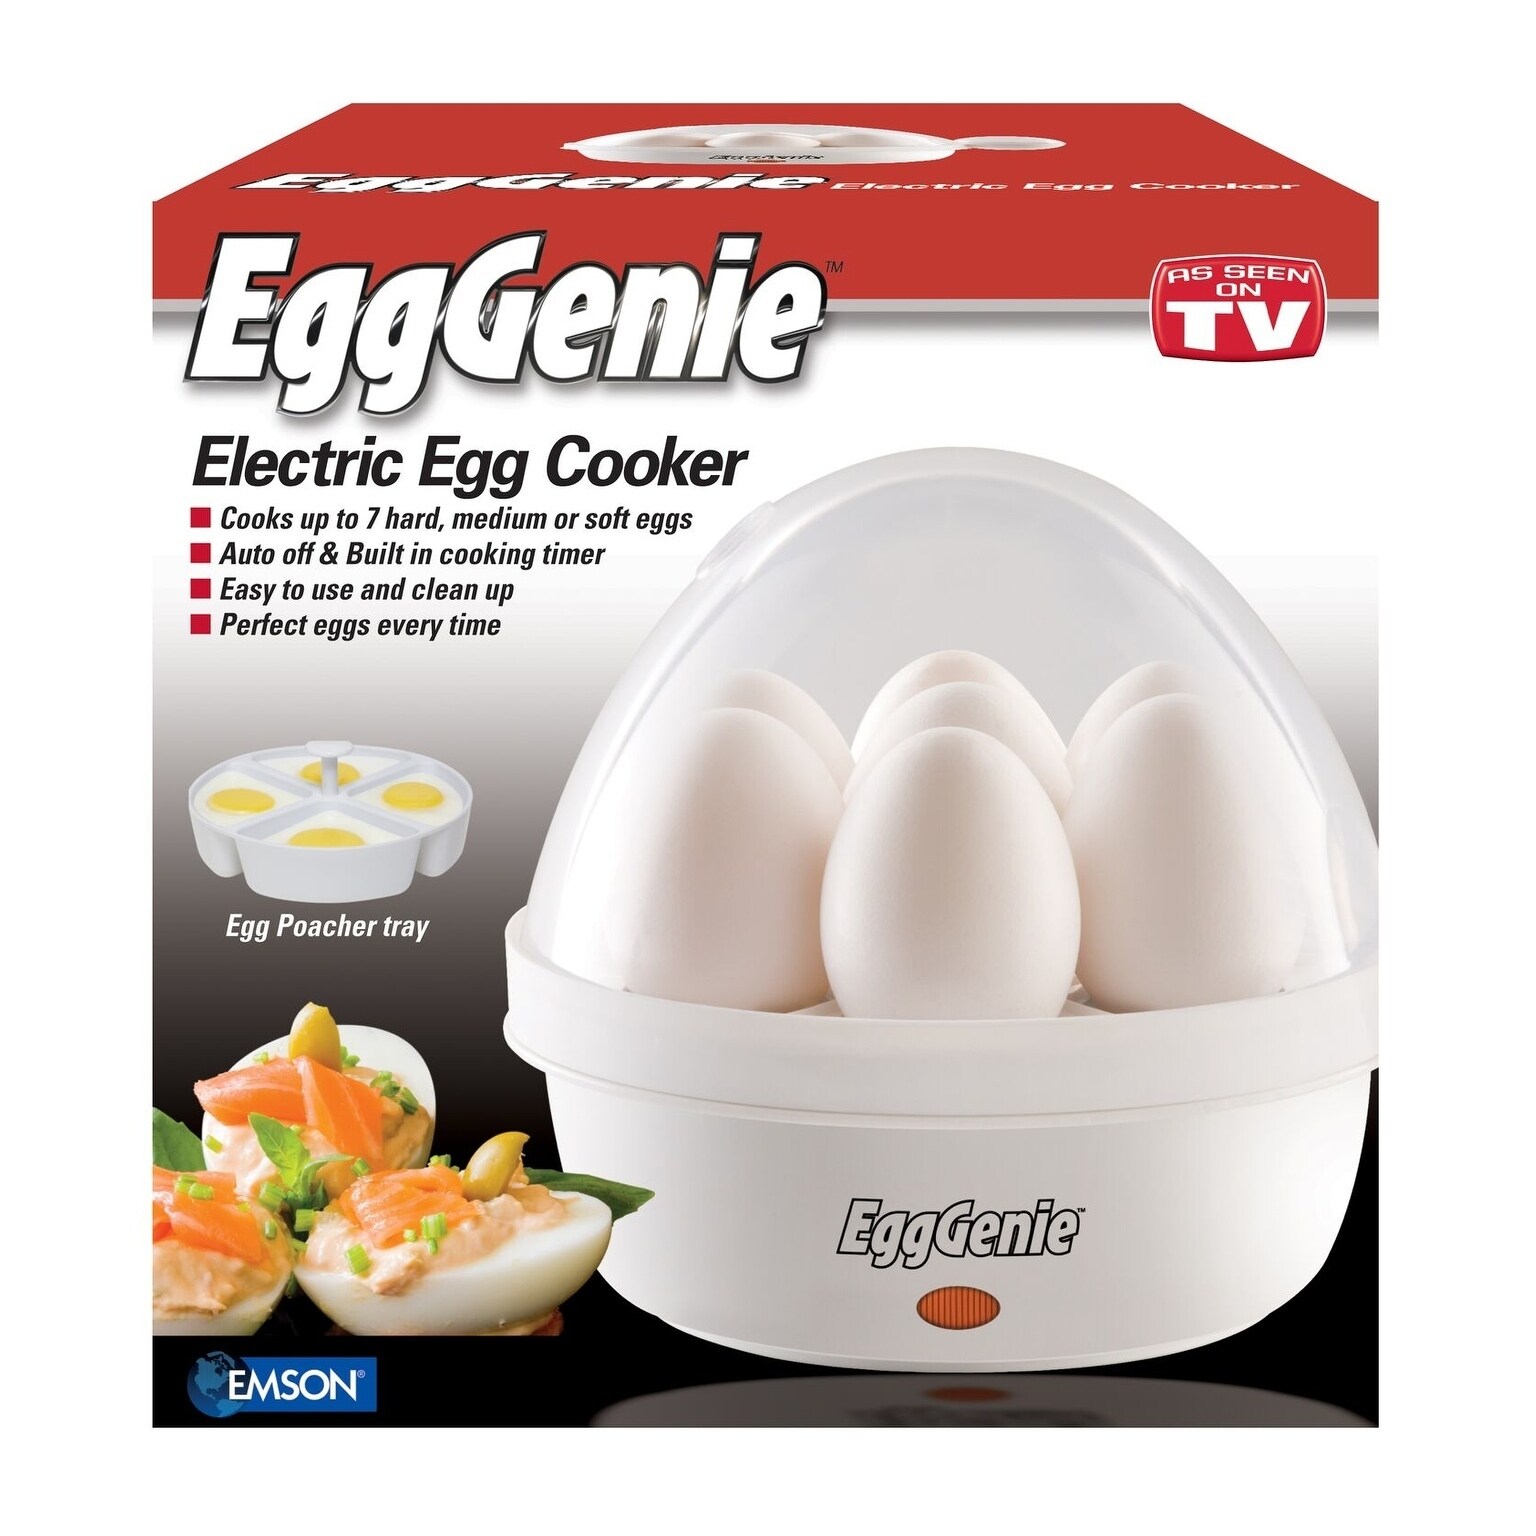 the perfect egg cooker